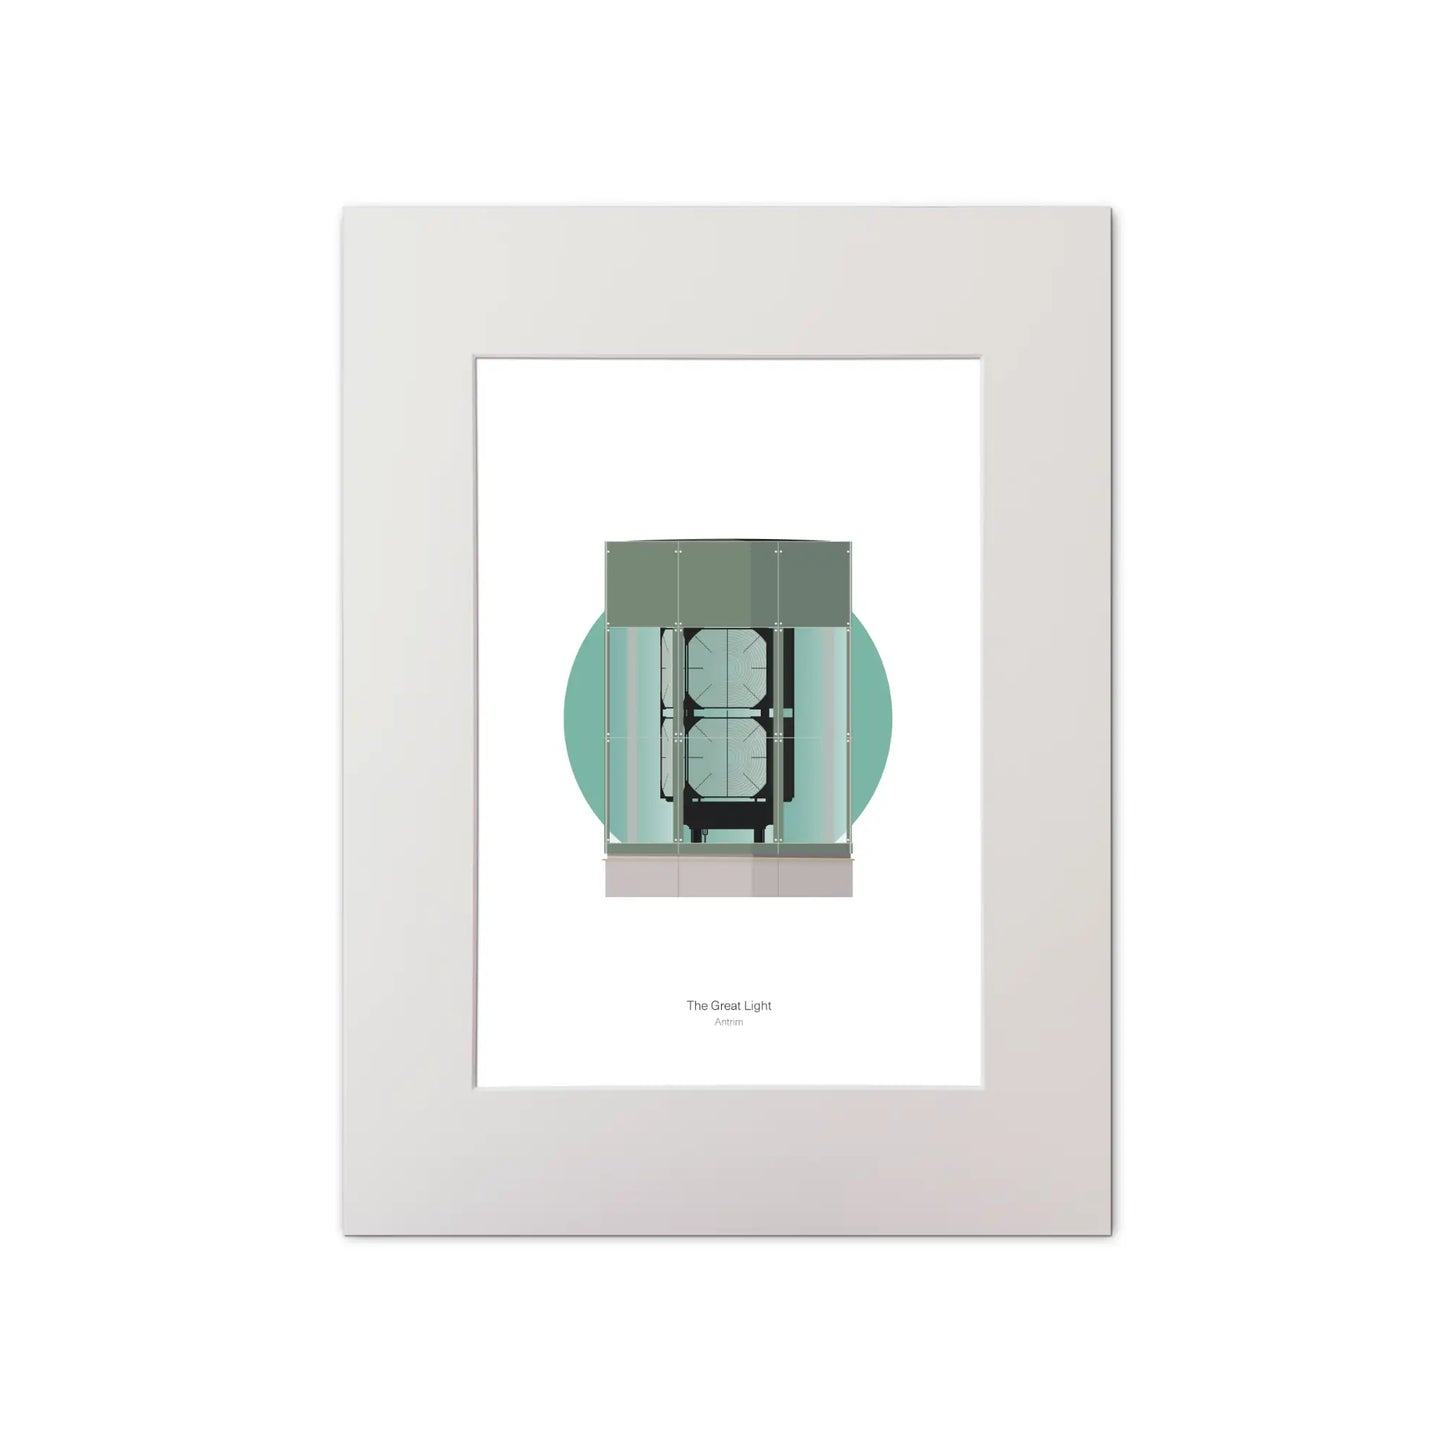 Contemporary graphic illustration of The Great Light lighthouse on a white background inside light blue square, mounted and measuring 30x40cm.